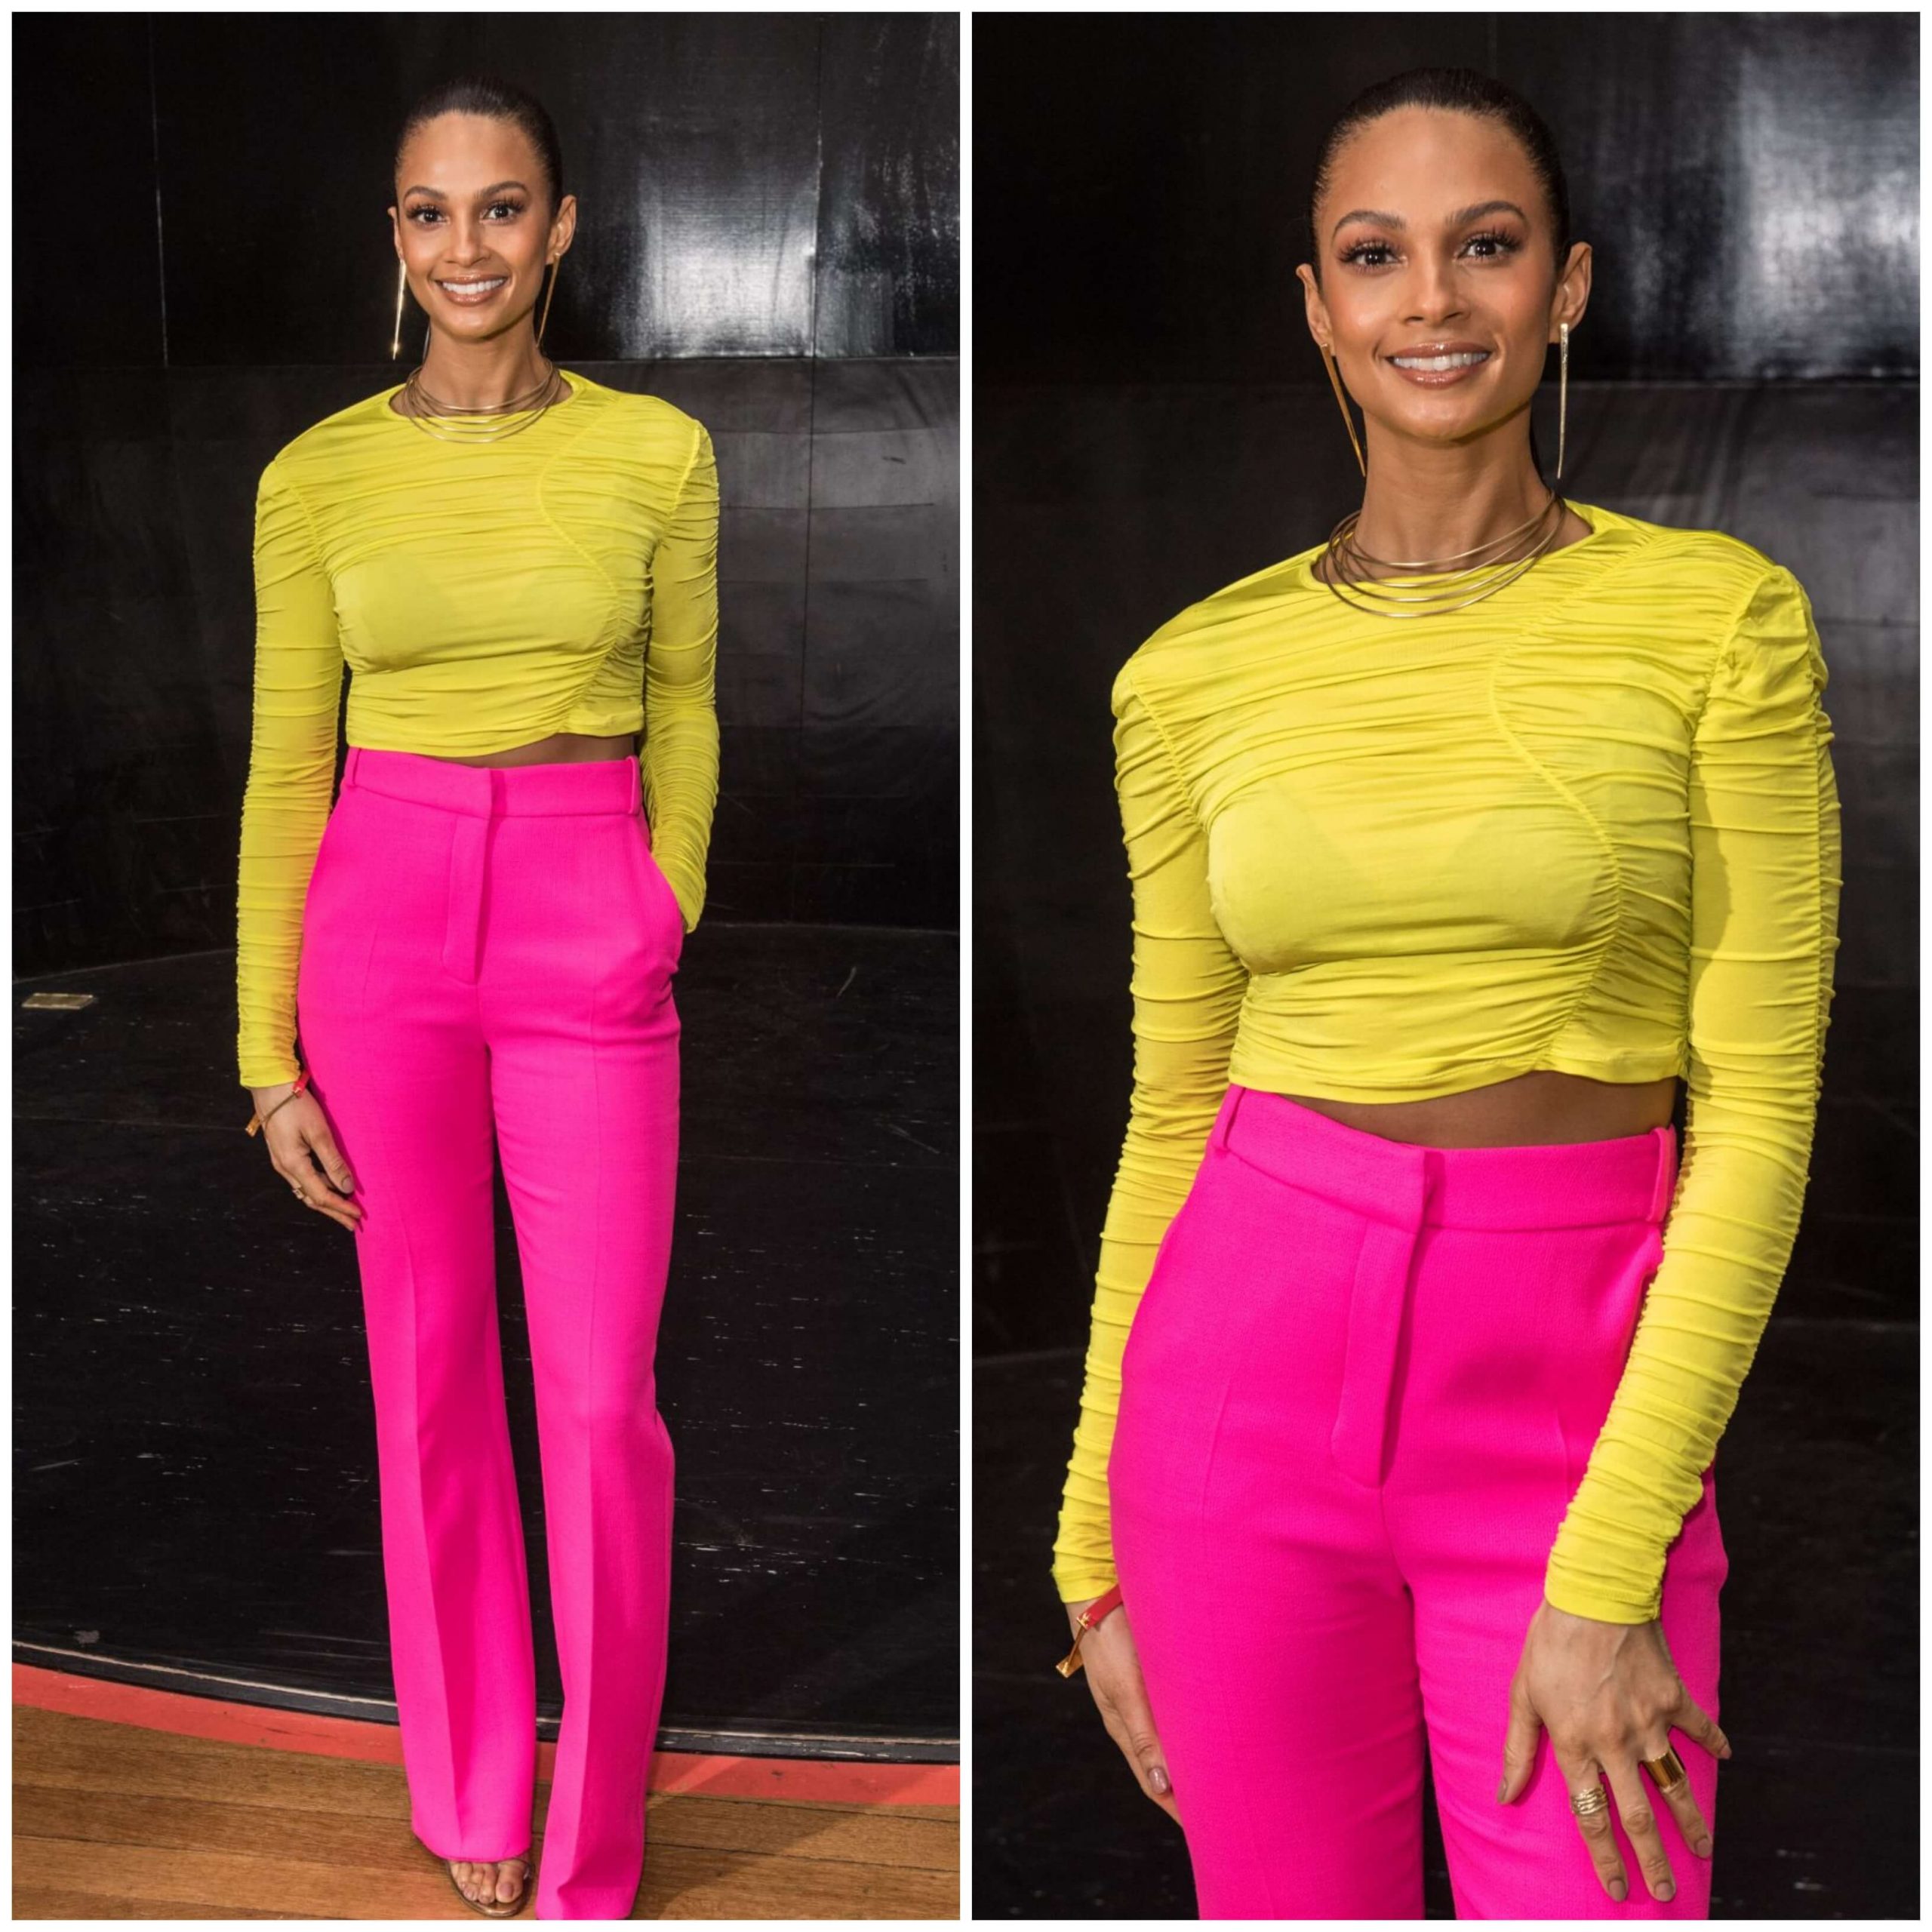 Alesha Dixon – In A Yellow Full Sleeves  Top & Pink Pants -  “Lightning Girl” Photocall at Science Museum in London